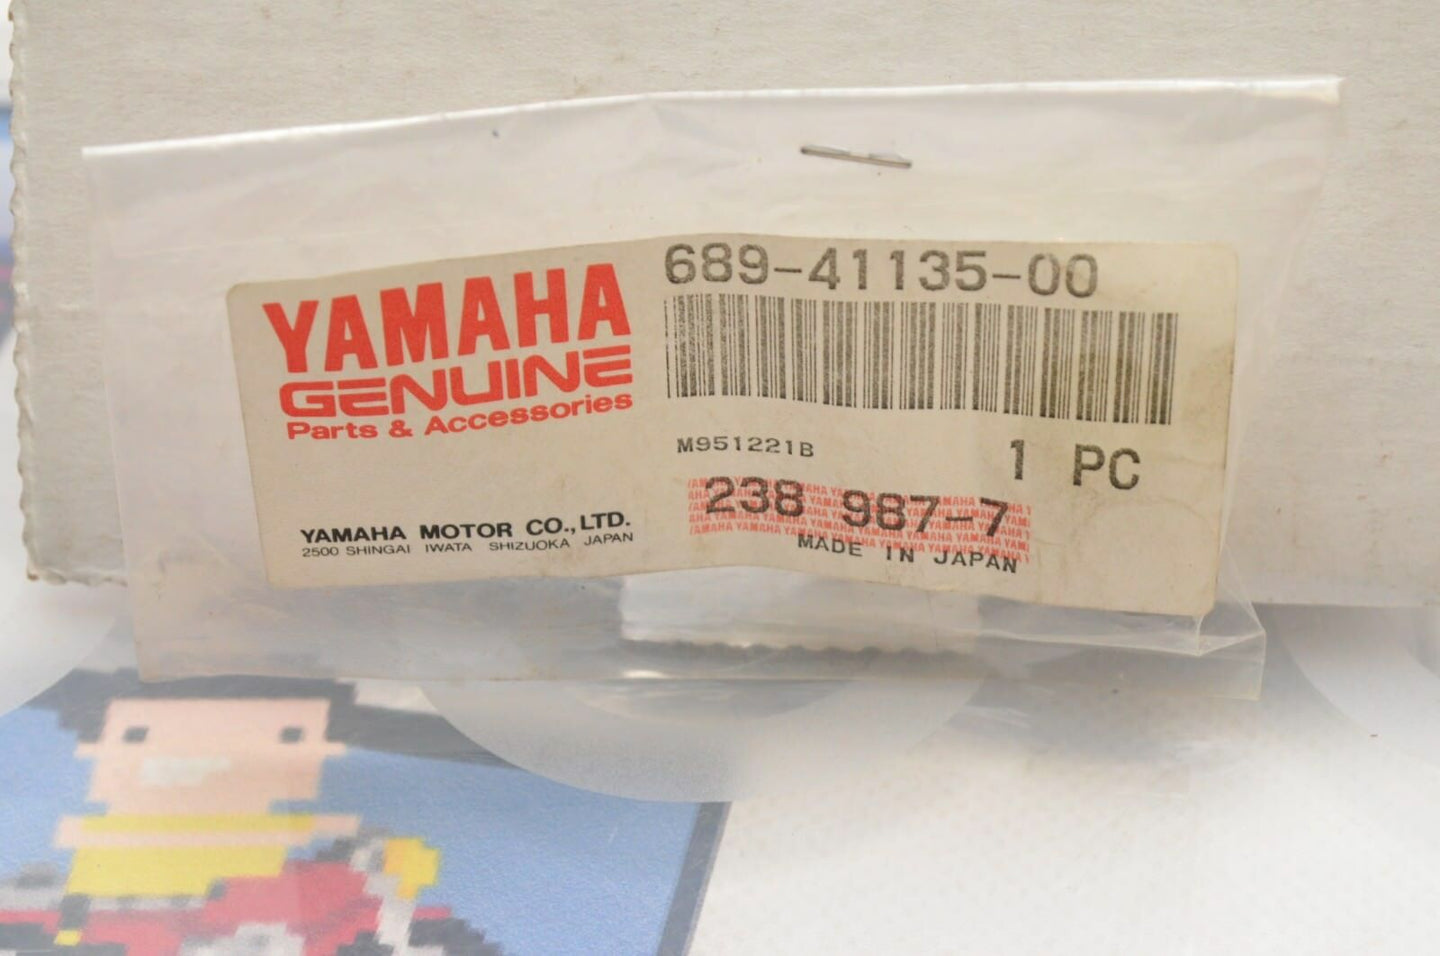 NEW NOS OEM YAMAHA 689-41135-00-00 GASKET,EXHAUST MANIFOLD 25HP + OUTBOARD MOTOR